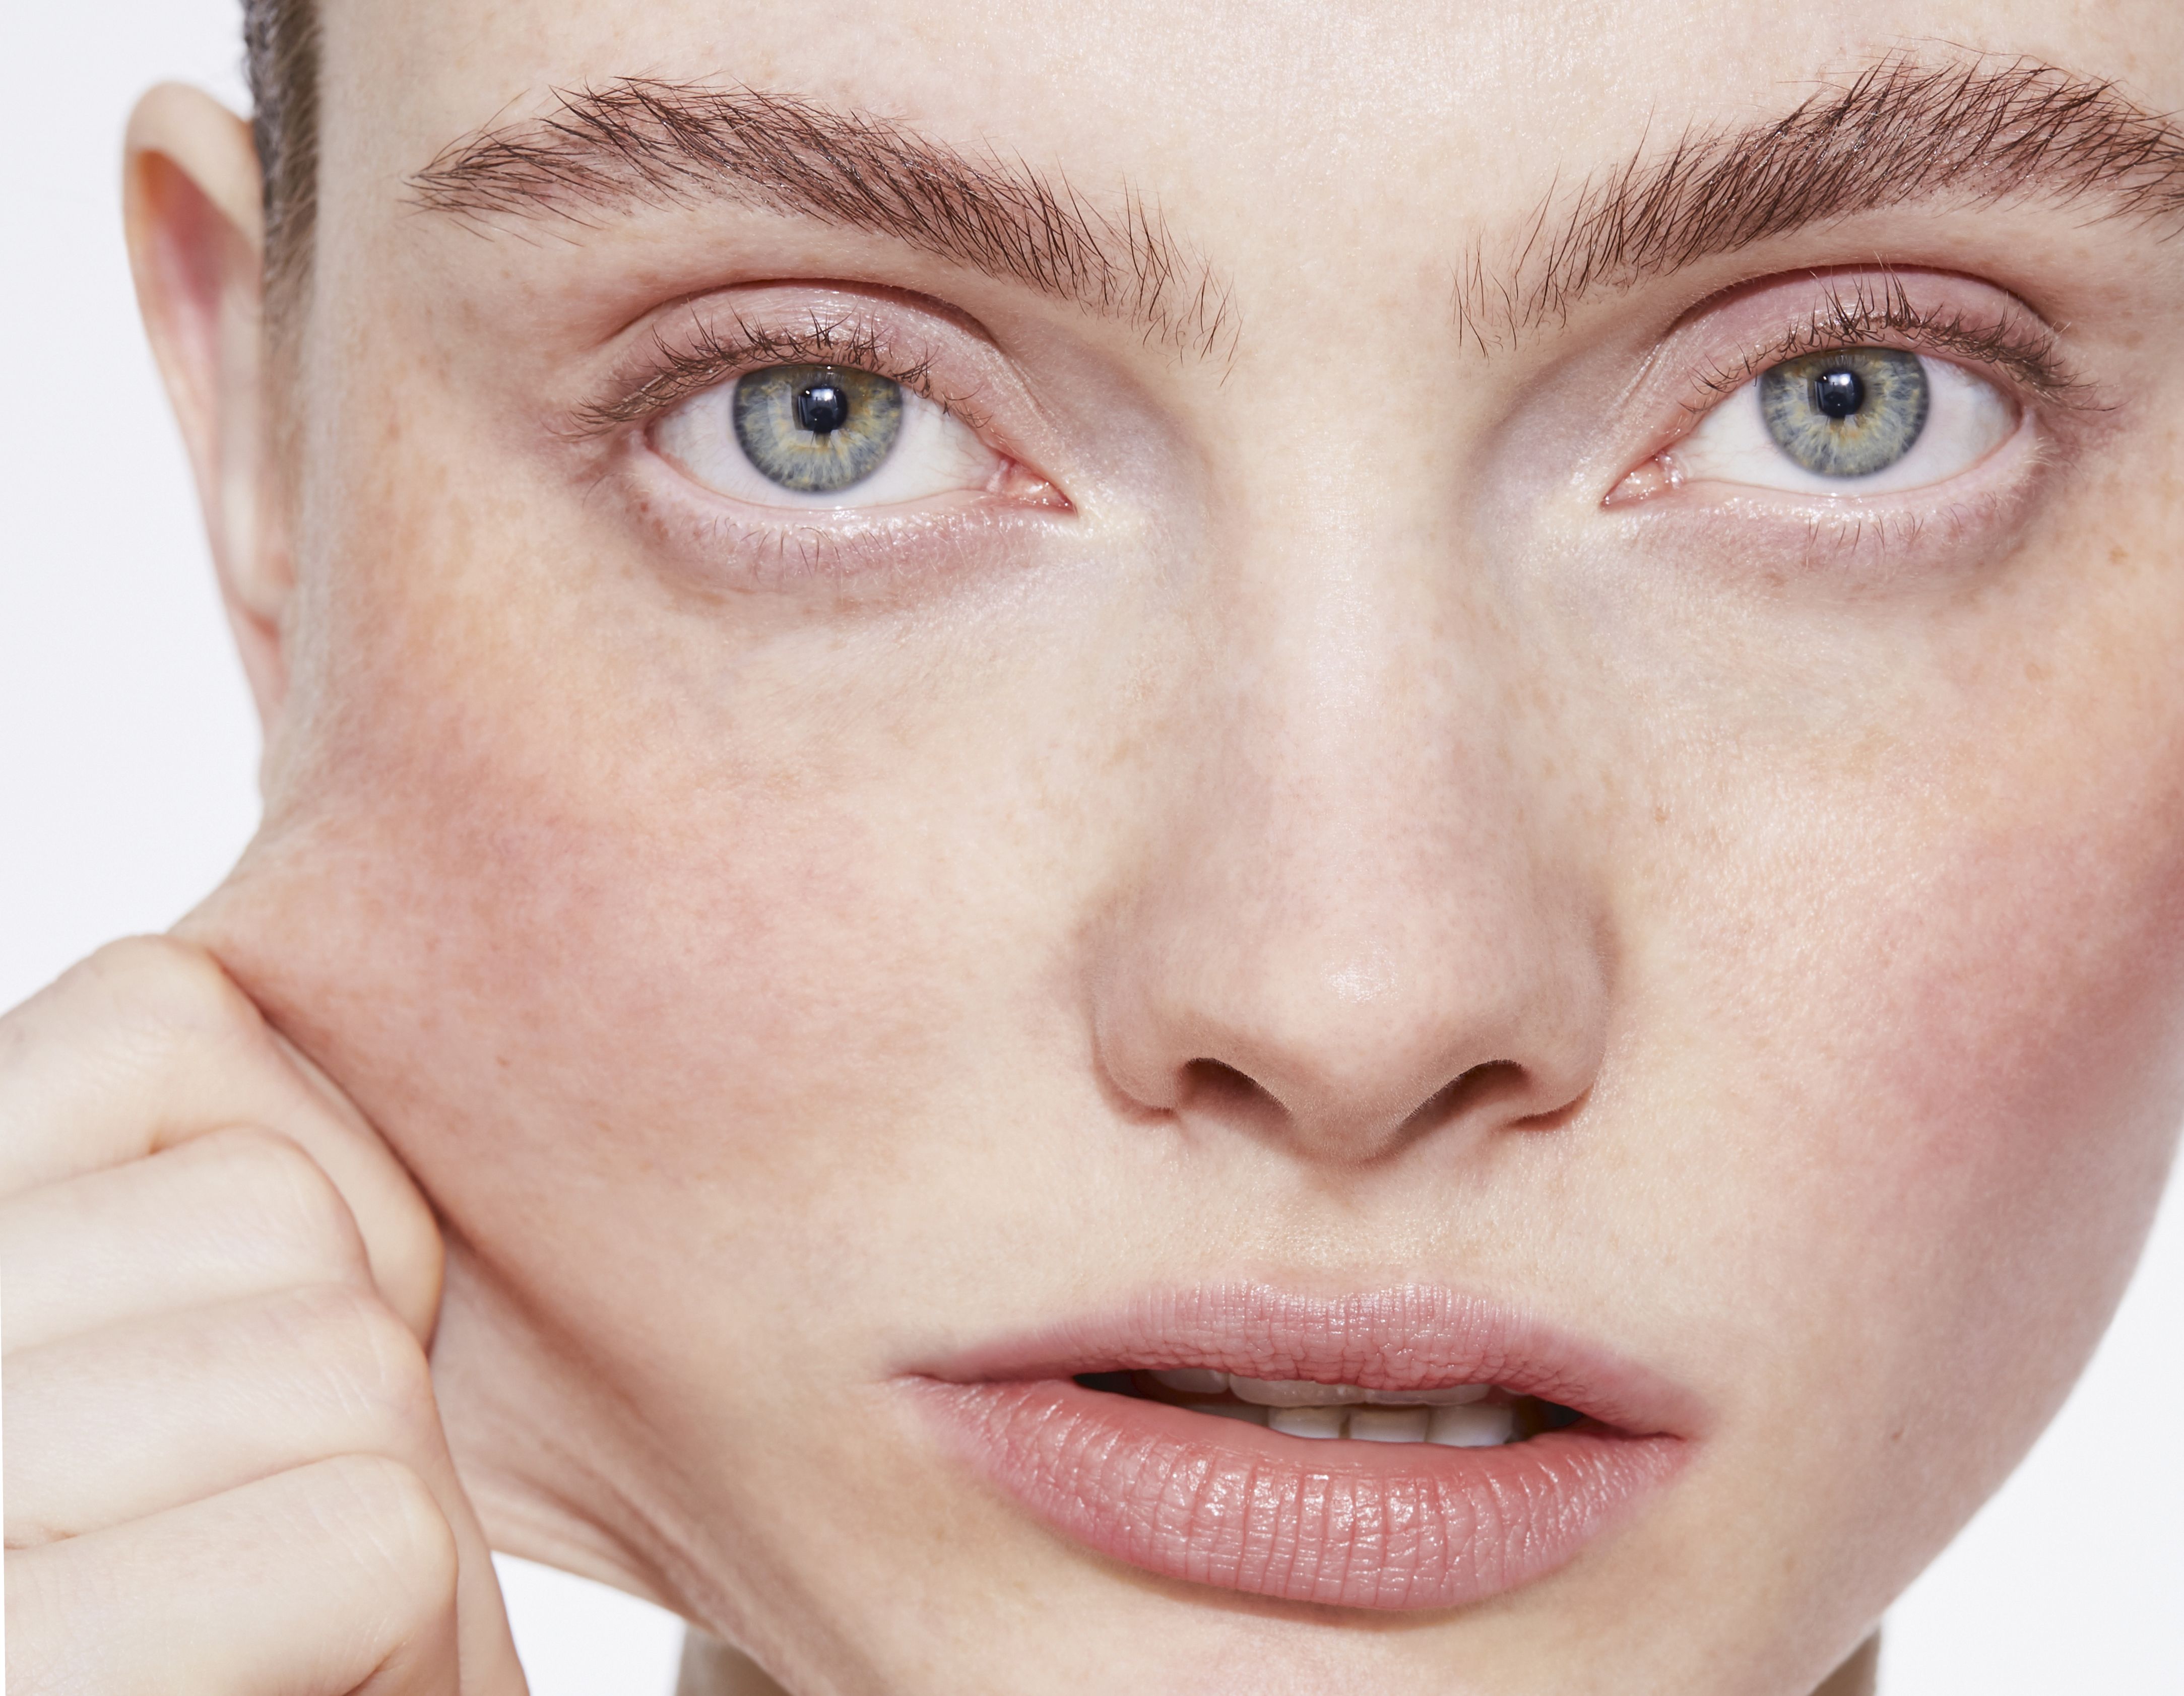 12 Ways to Make Your Face Appear Slimmer and More Sculpted